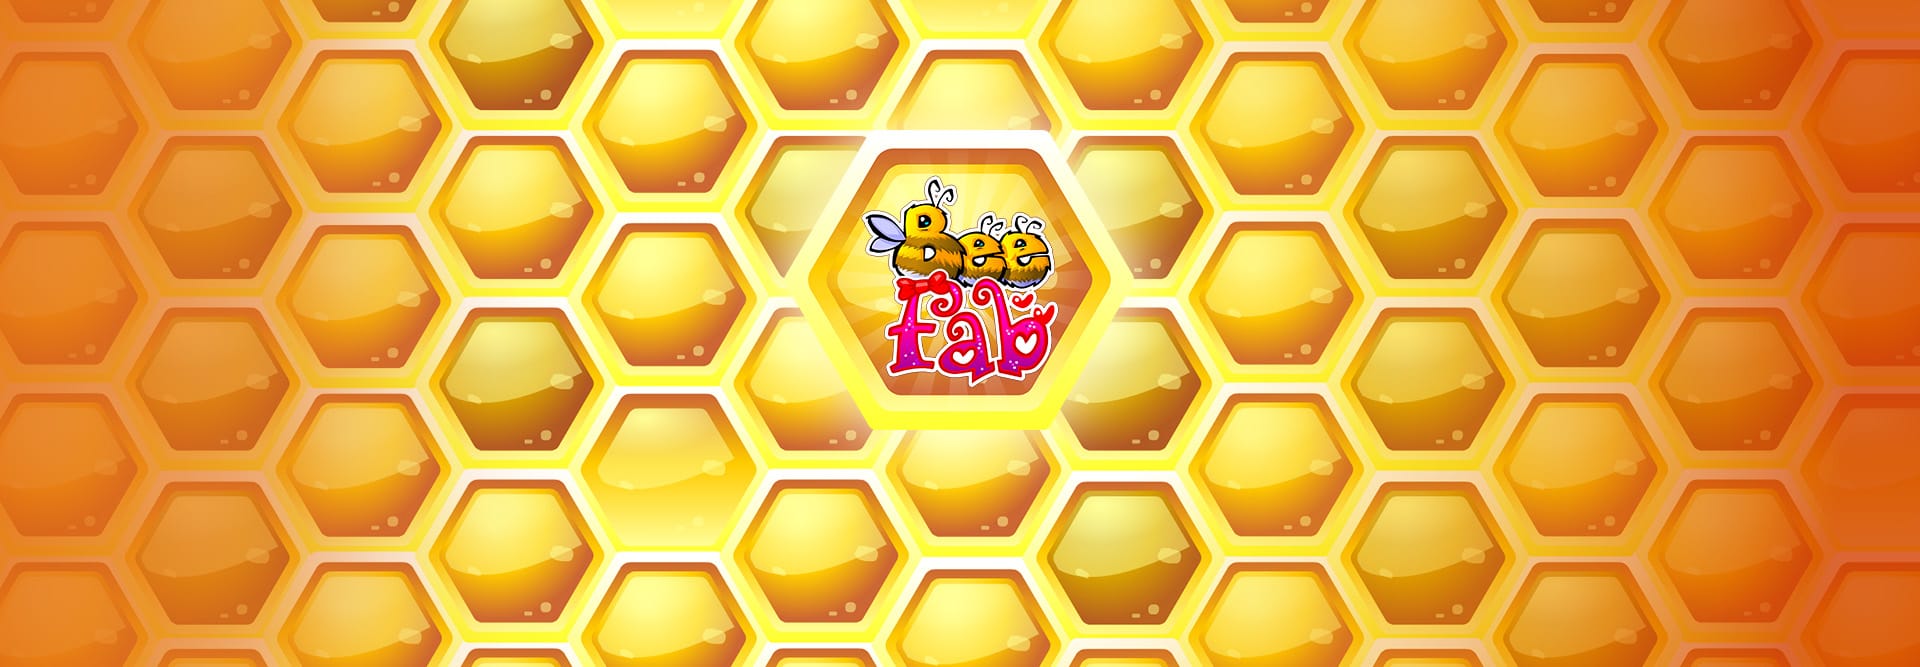 Bee Fab - Game Banner